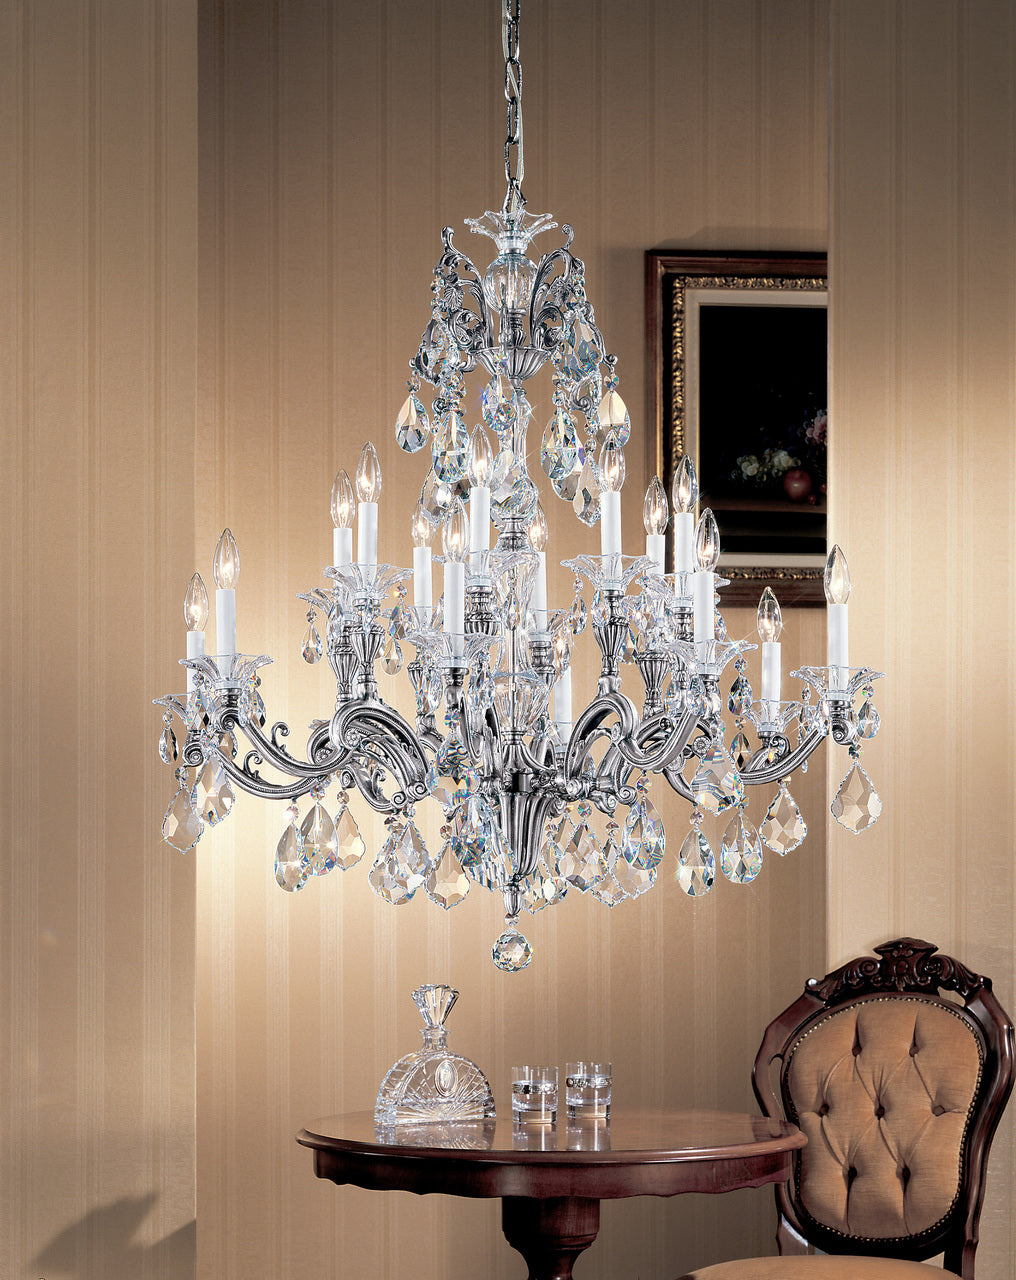 Classic Lighting 57116 RB IRA Via Firenze Crystal Chandelier in Roman Bronze (Imported from Spain)